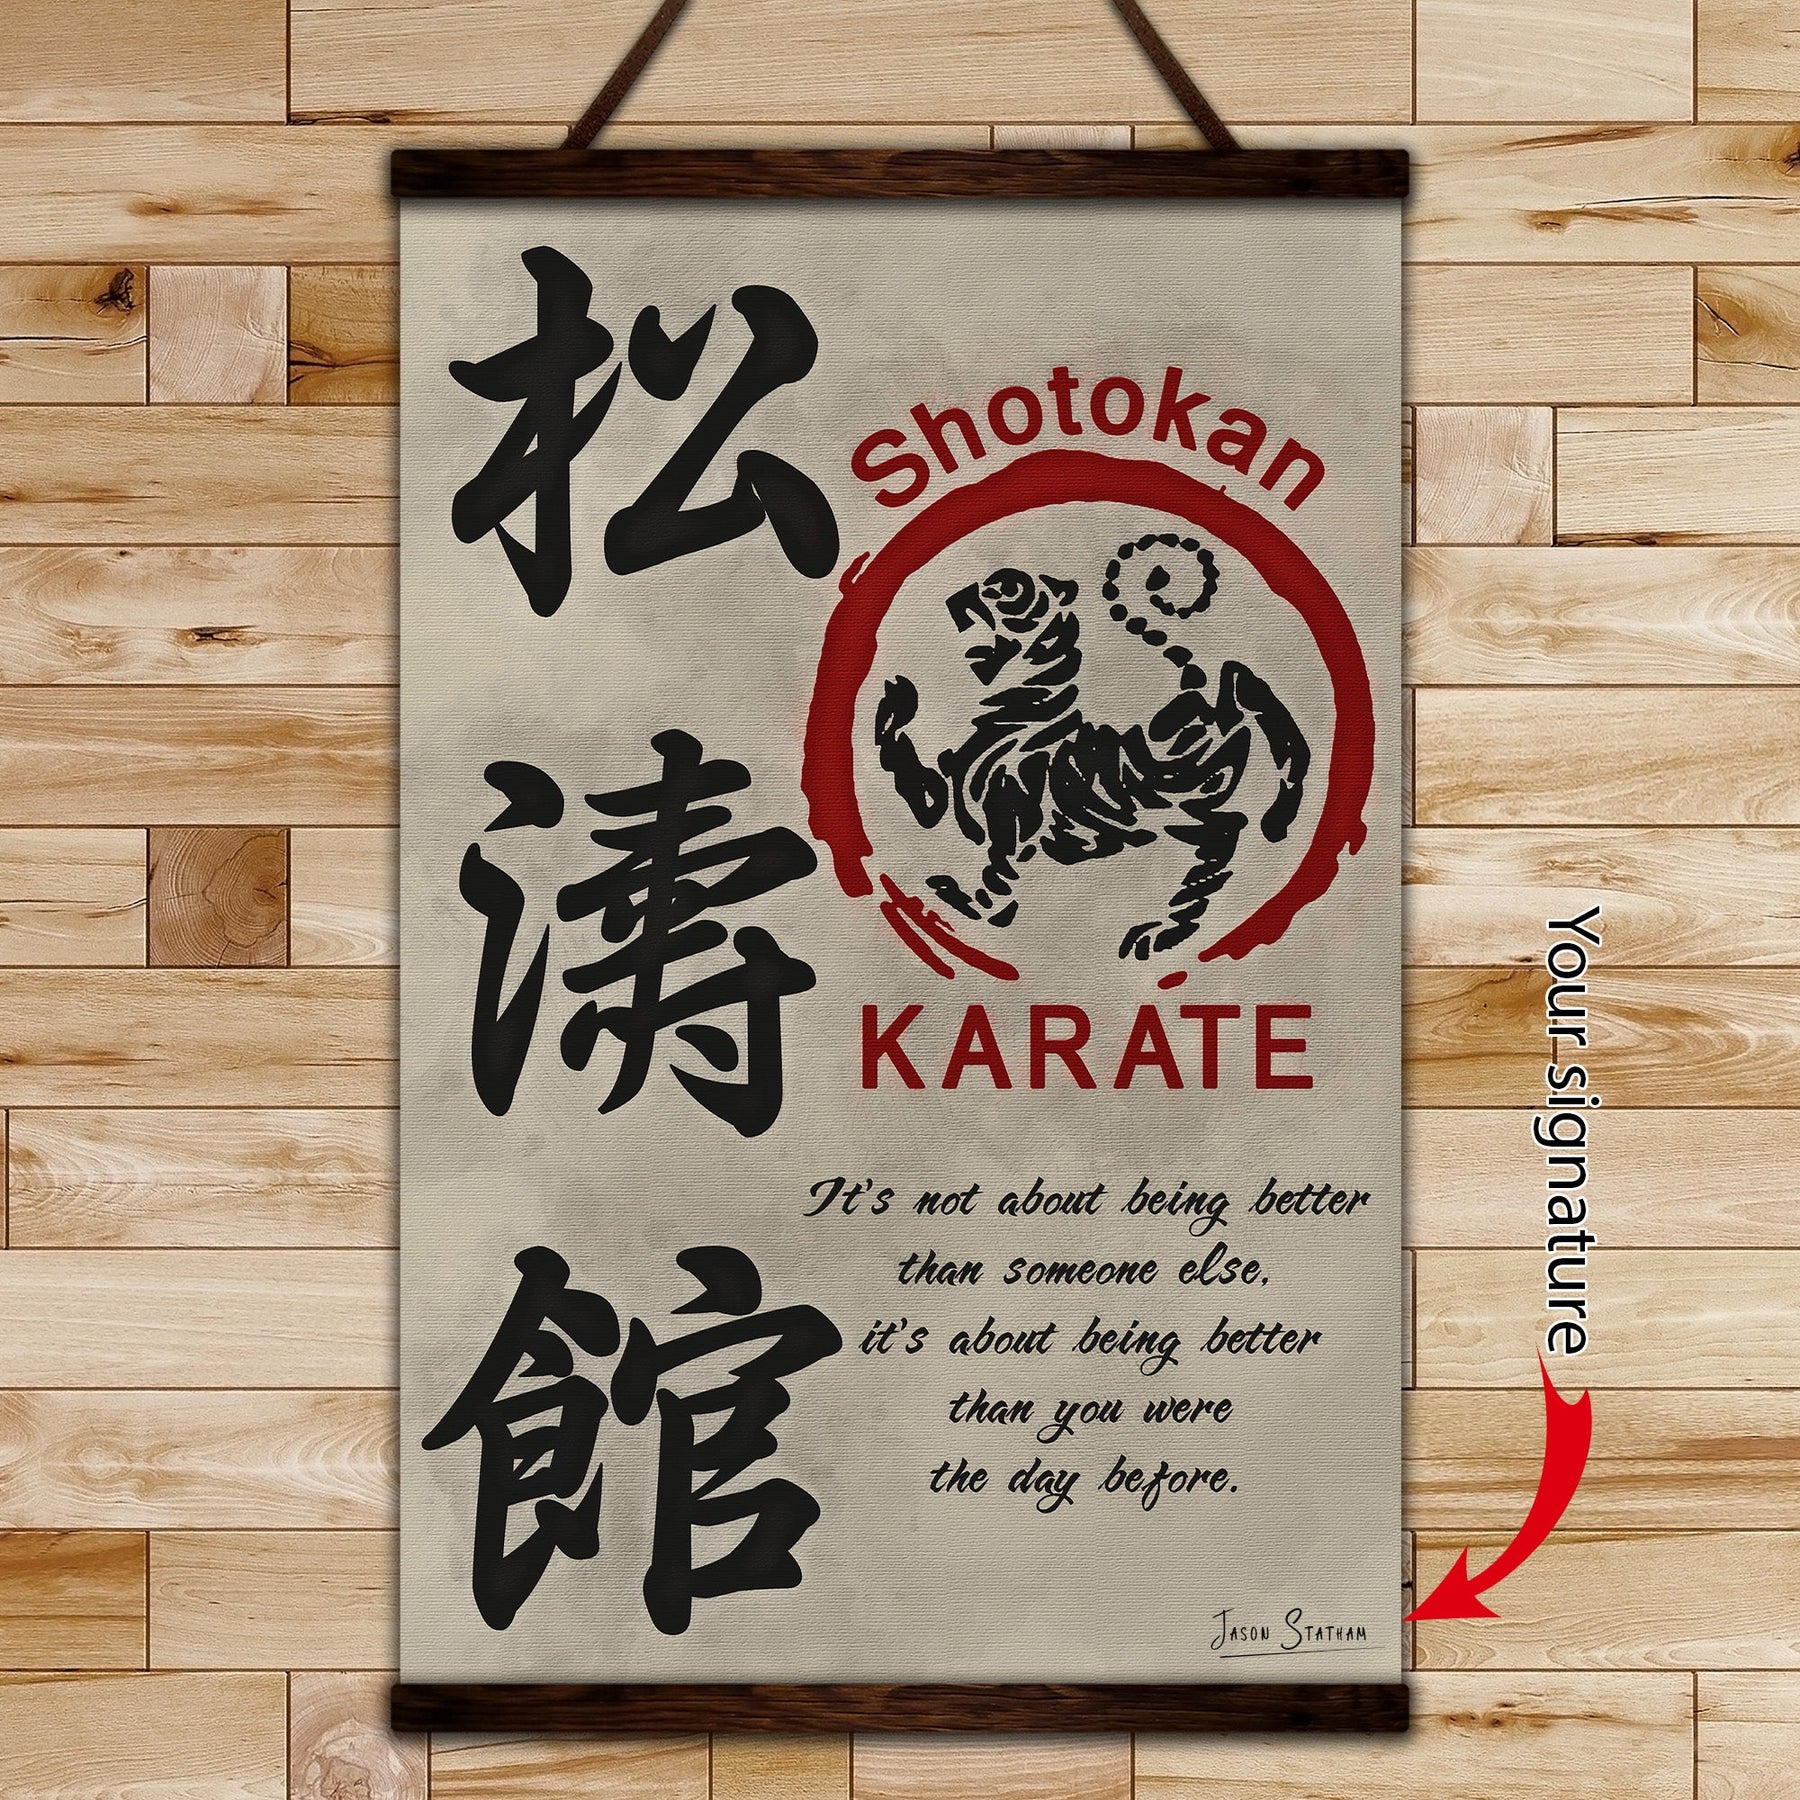 KA017 - It's About Being Better Than You Were The Day Before - Shotokan Karate - Vertical Poster - Vertical Canvas - Karate Poster